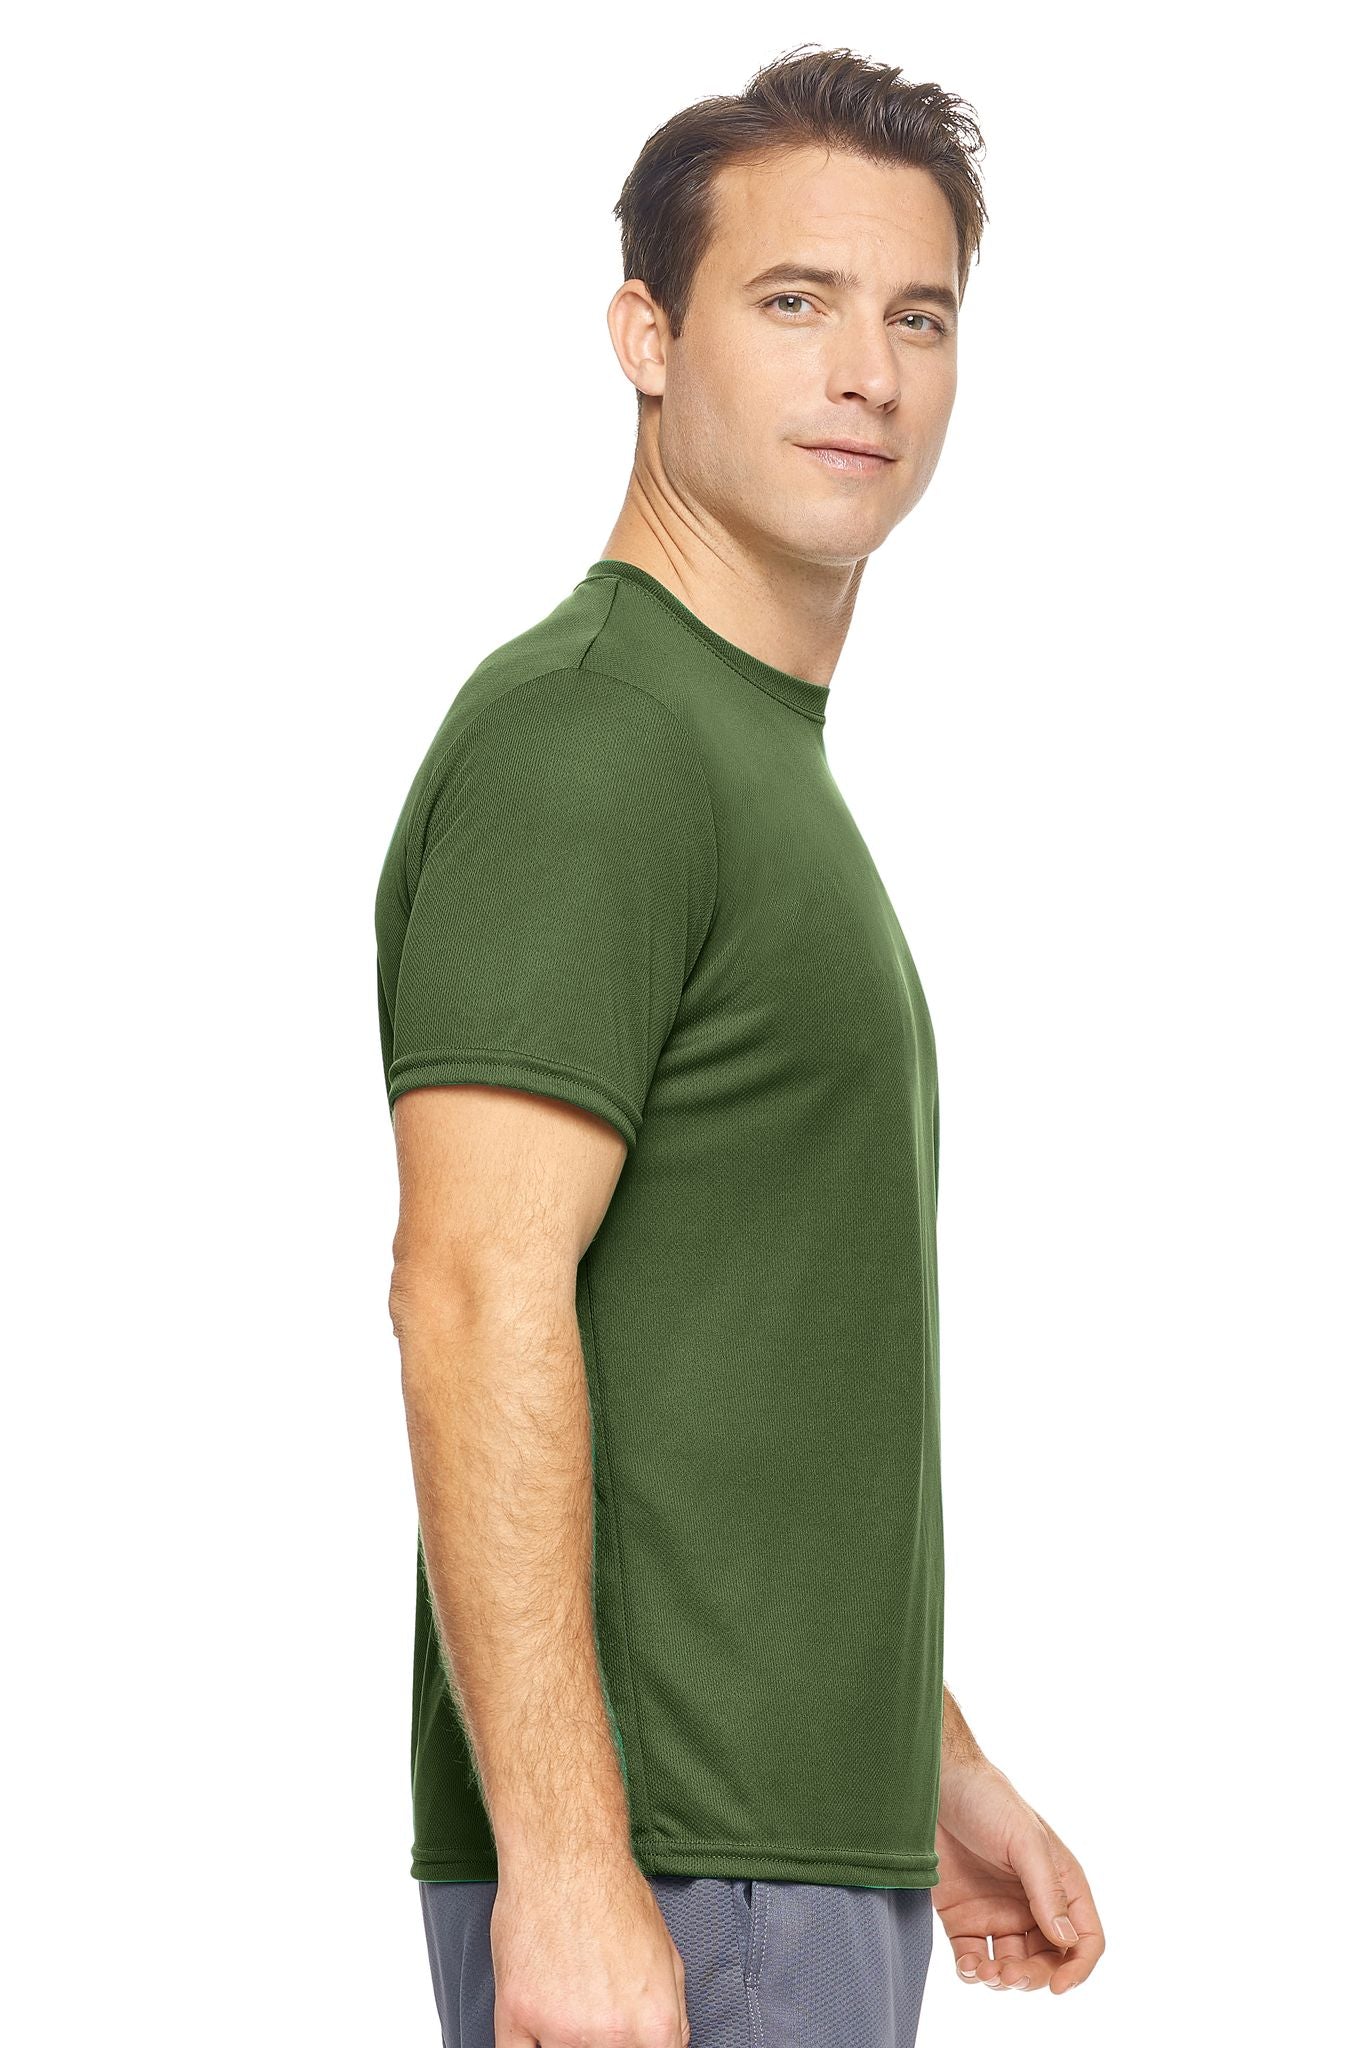 Expert Brand Retail Sportswear Made in USA Men's Oxymesh™ Crewneck Tec Tee  Military Green 2#color_military-green